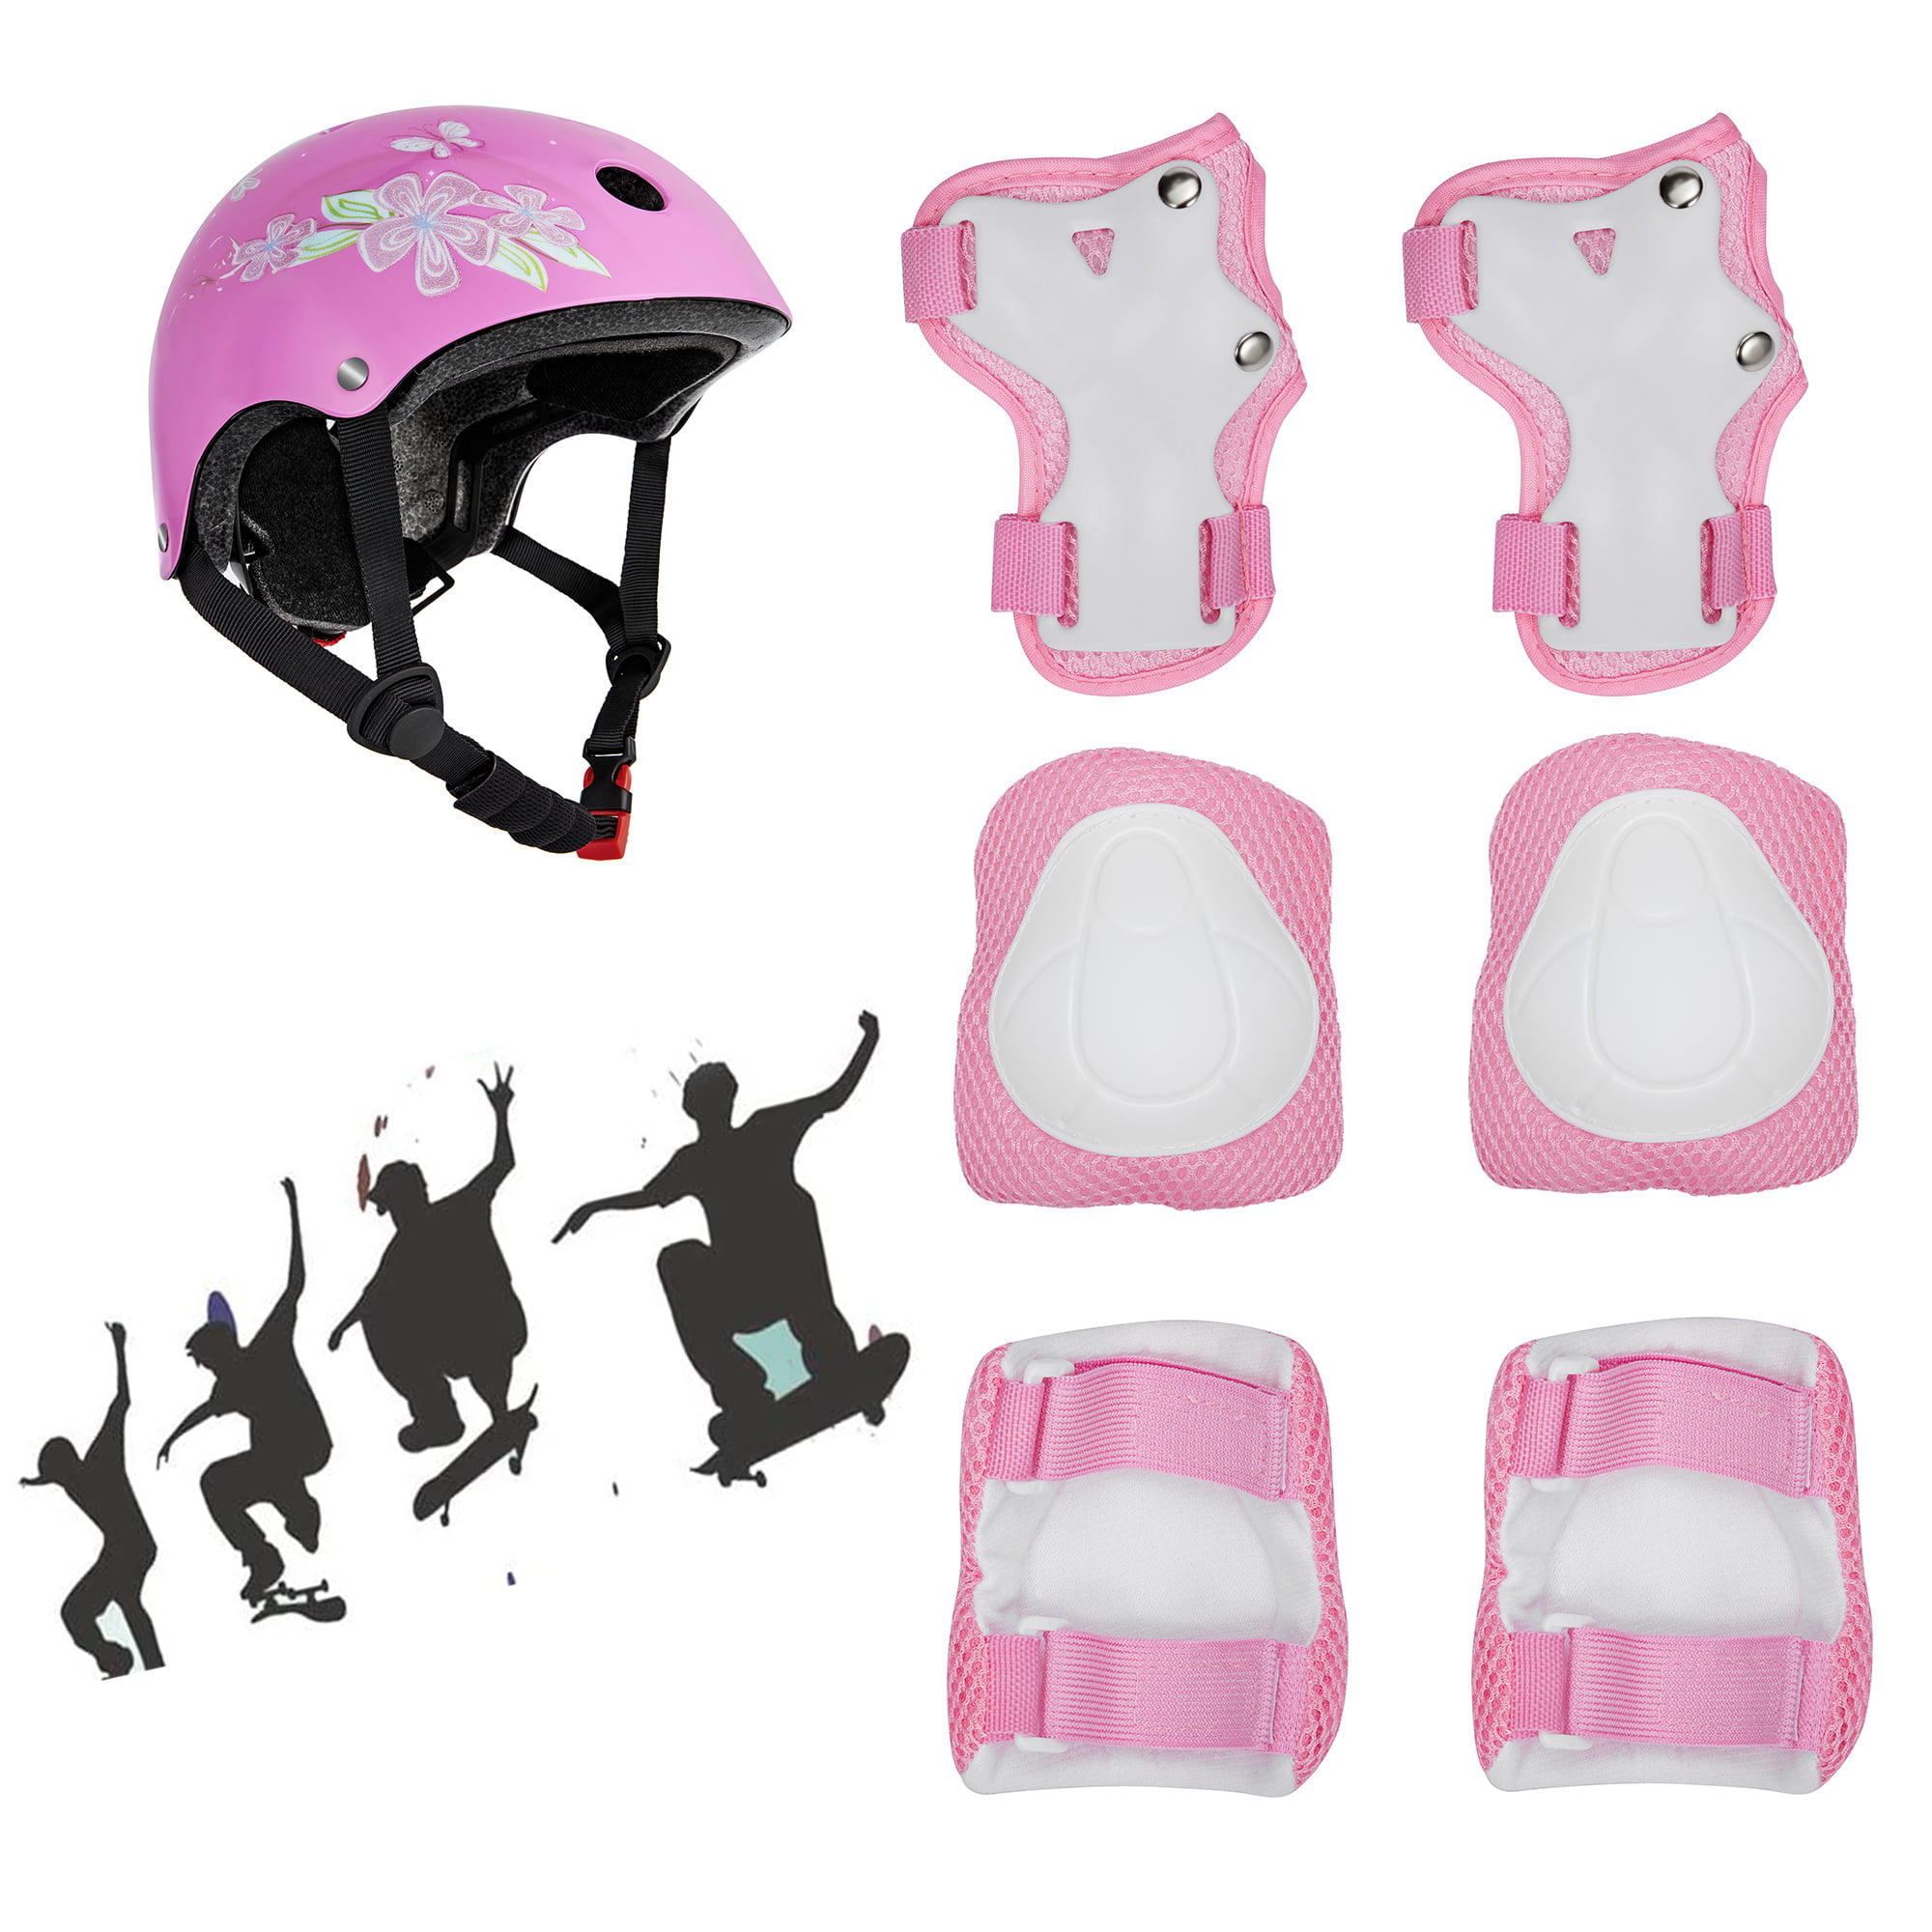 Lucky-M Kids Protective Gear Set Boys Girls Adjustable Size Helmet with Knee Pads Elbow Pads Wrist Guards For Skateboard Cycling Hoverboard Scooter Rollerblading